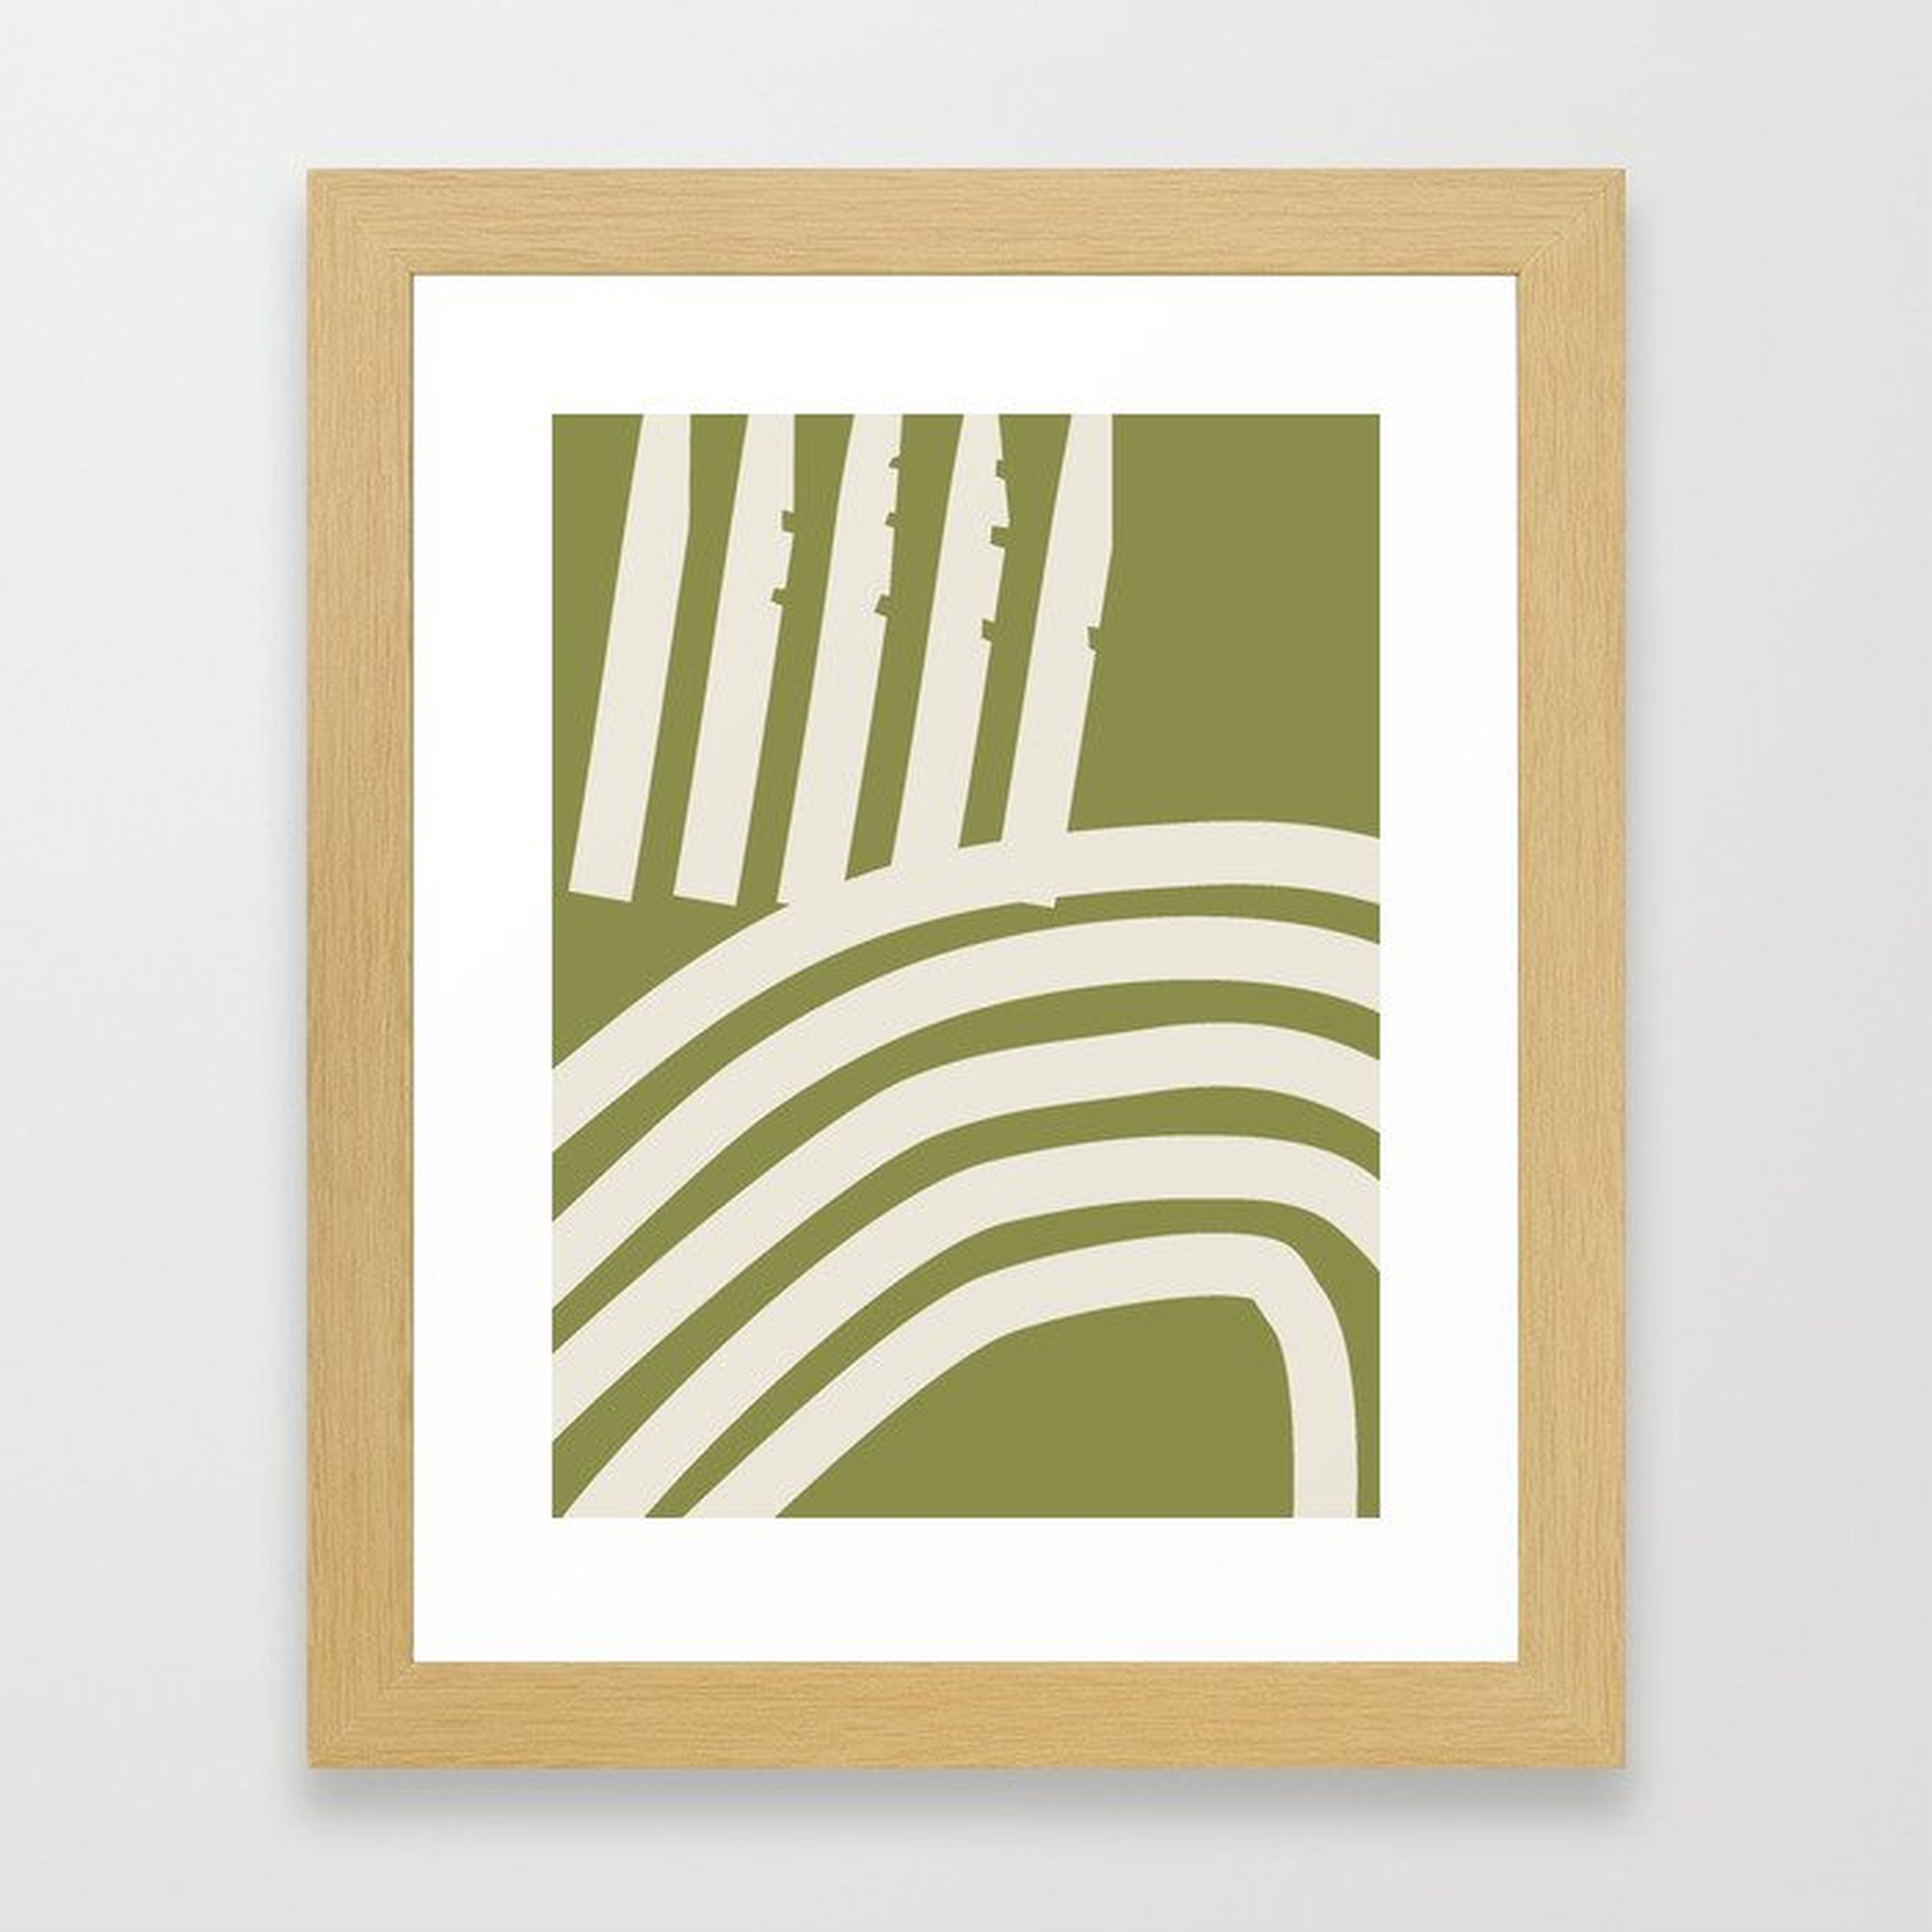 Linea 13a Framed Art Print by The Old Art Studio - Conservation Natural - X-Small-10x12 - Society6